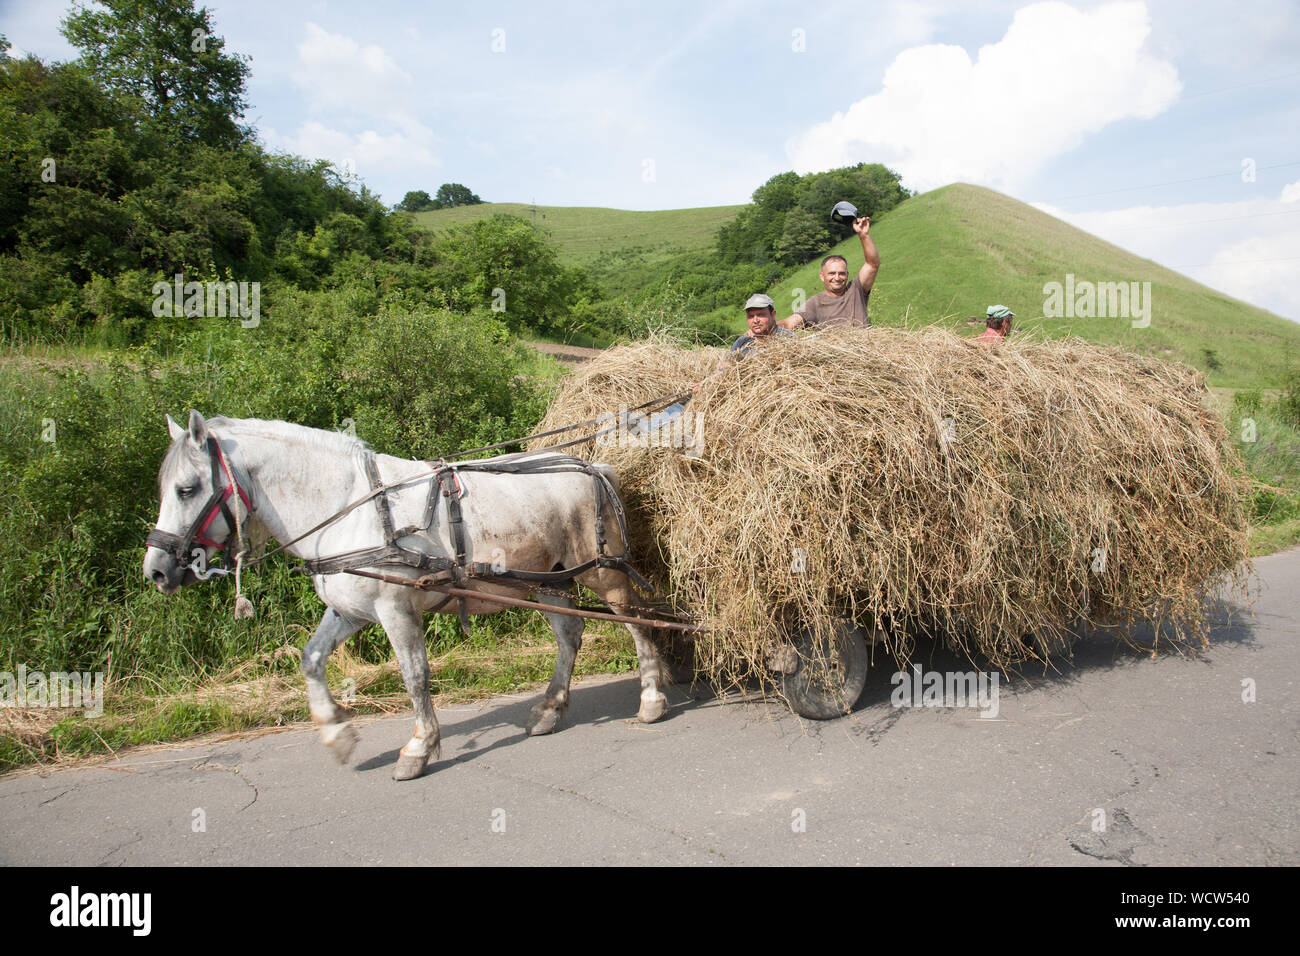 A horse pulls an overloaded hay cart with three men sitting on top, one  waving his cap. Medias, Transylvania, Romania Stock Photo - Alamy